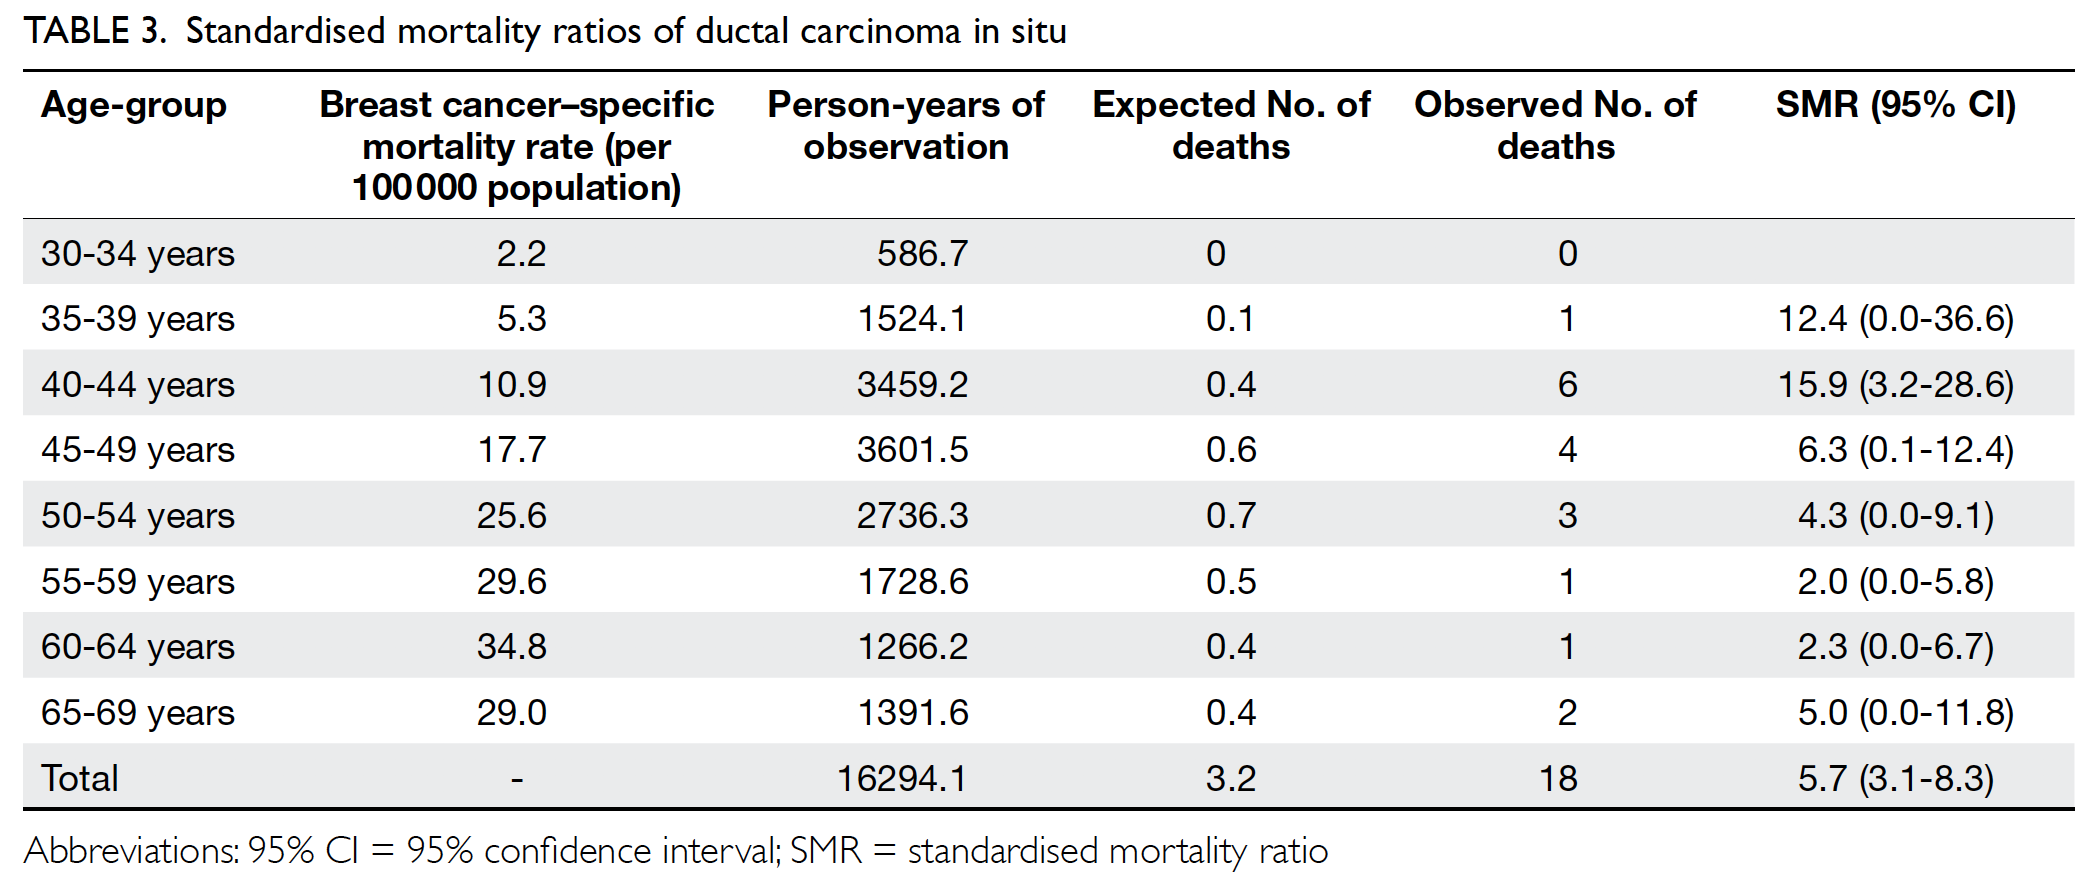 curtain Pacific Islands complete Clinical outcomes of patients with ductal carcinoma in situ in Hong Kong:  10-year territory-wide cancer registry study | HKMJ